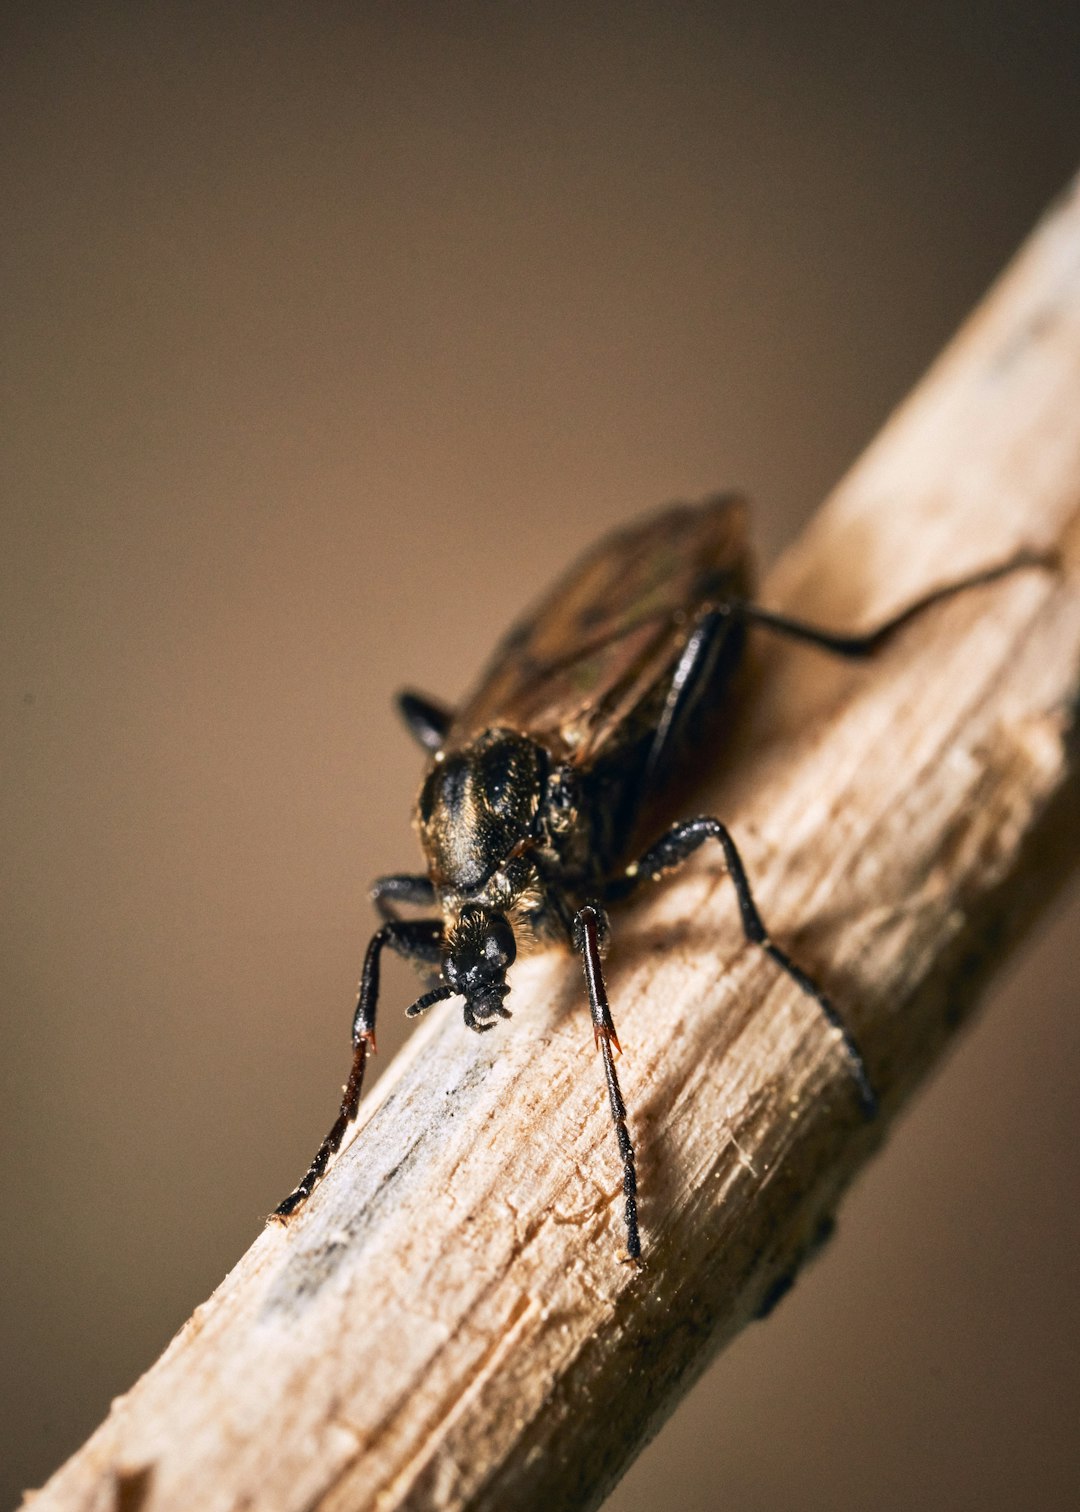 black and brown insect on brown wooden stick in close up photography during daytime